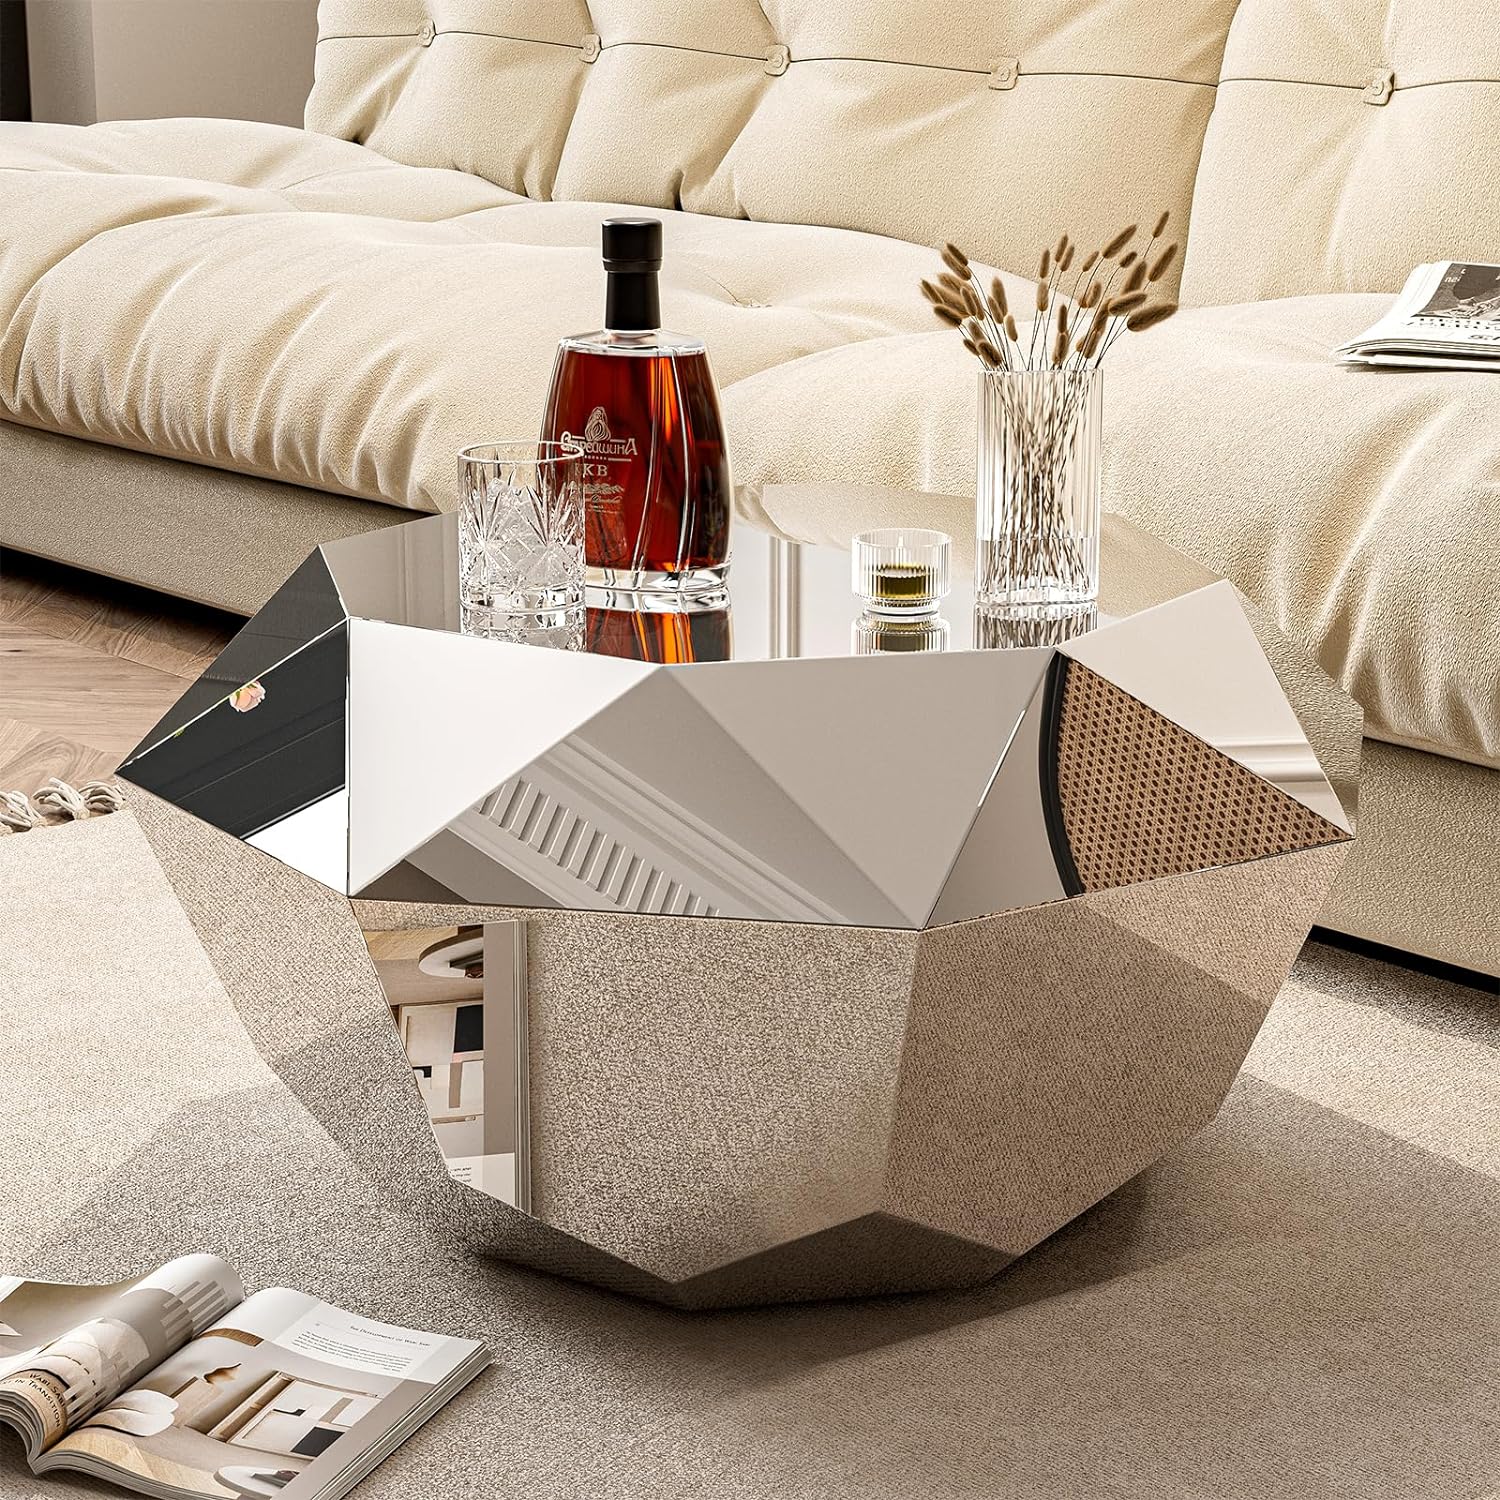 IKIFLY Modern Silver Stainless Coffee Table, Small Diamond Fashion Design Accent Table End Table for Living Room Bedroom